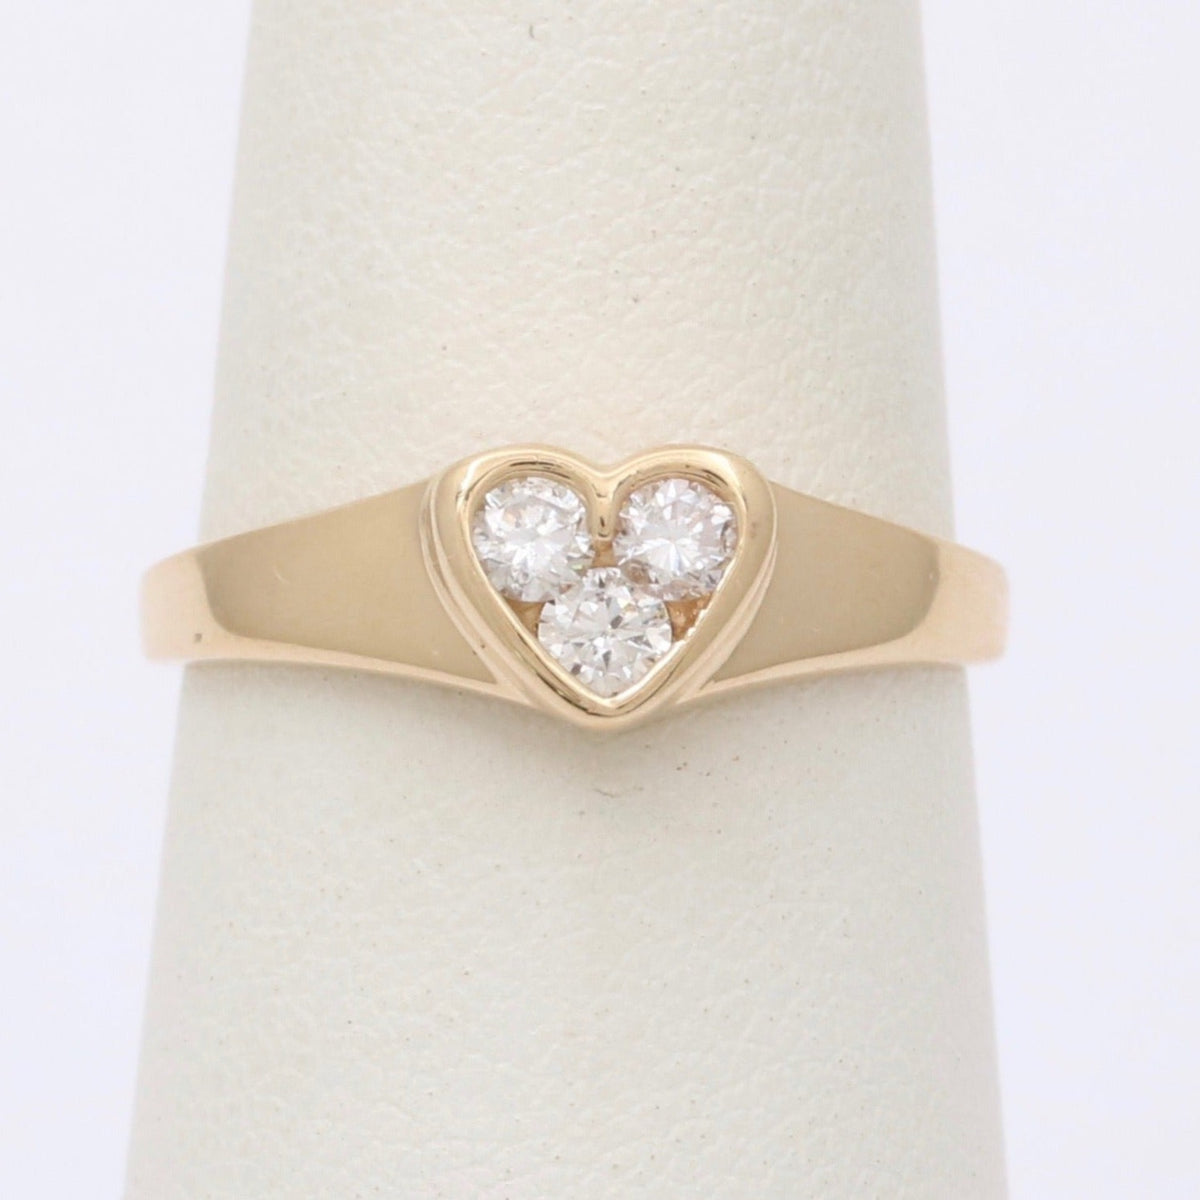 Vintage Diamond and 14K Gold Heart-Shaped Signet Ring